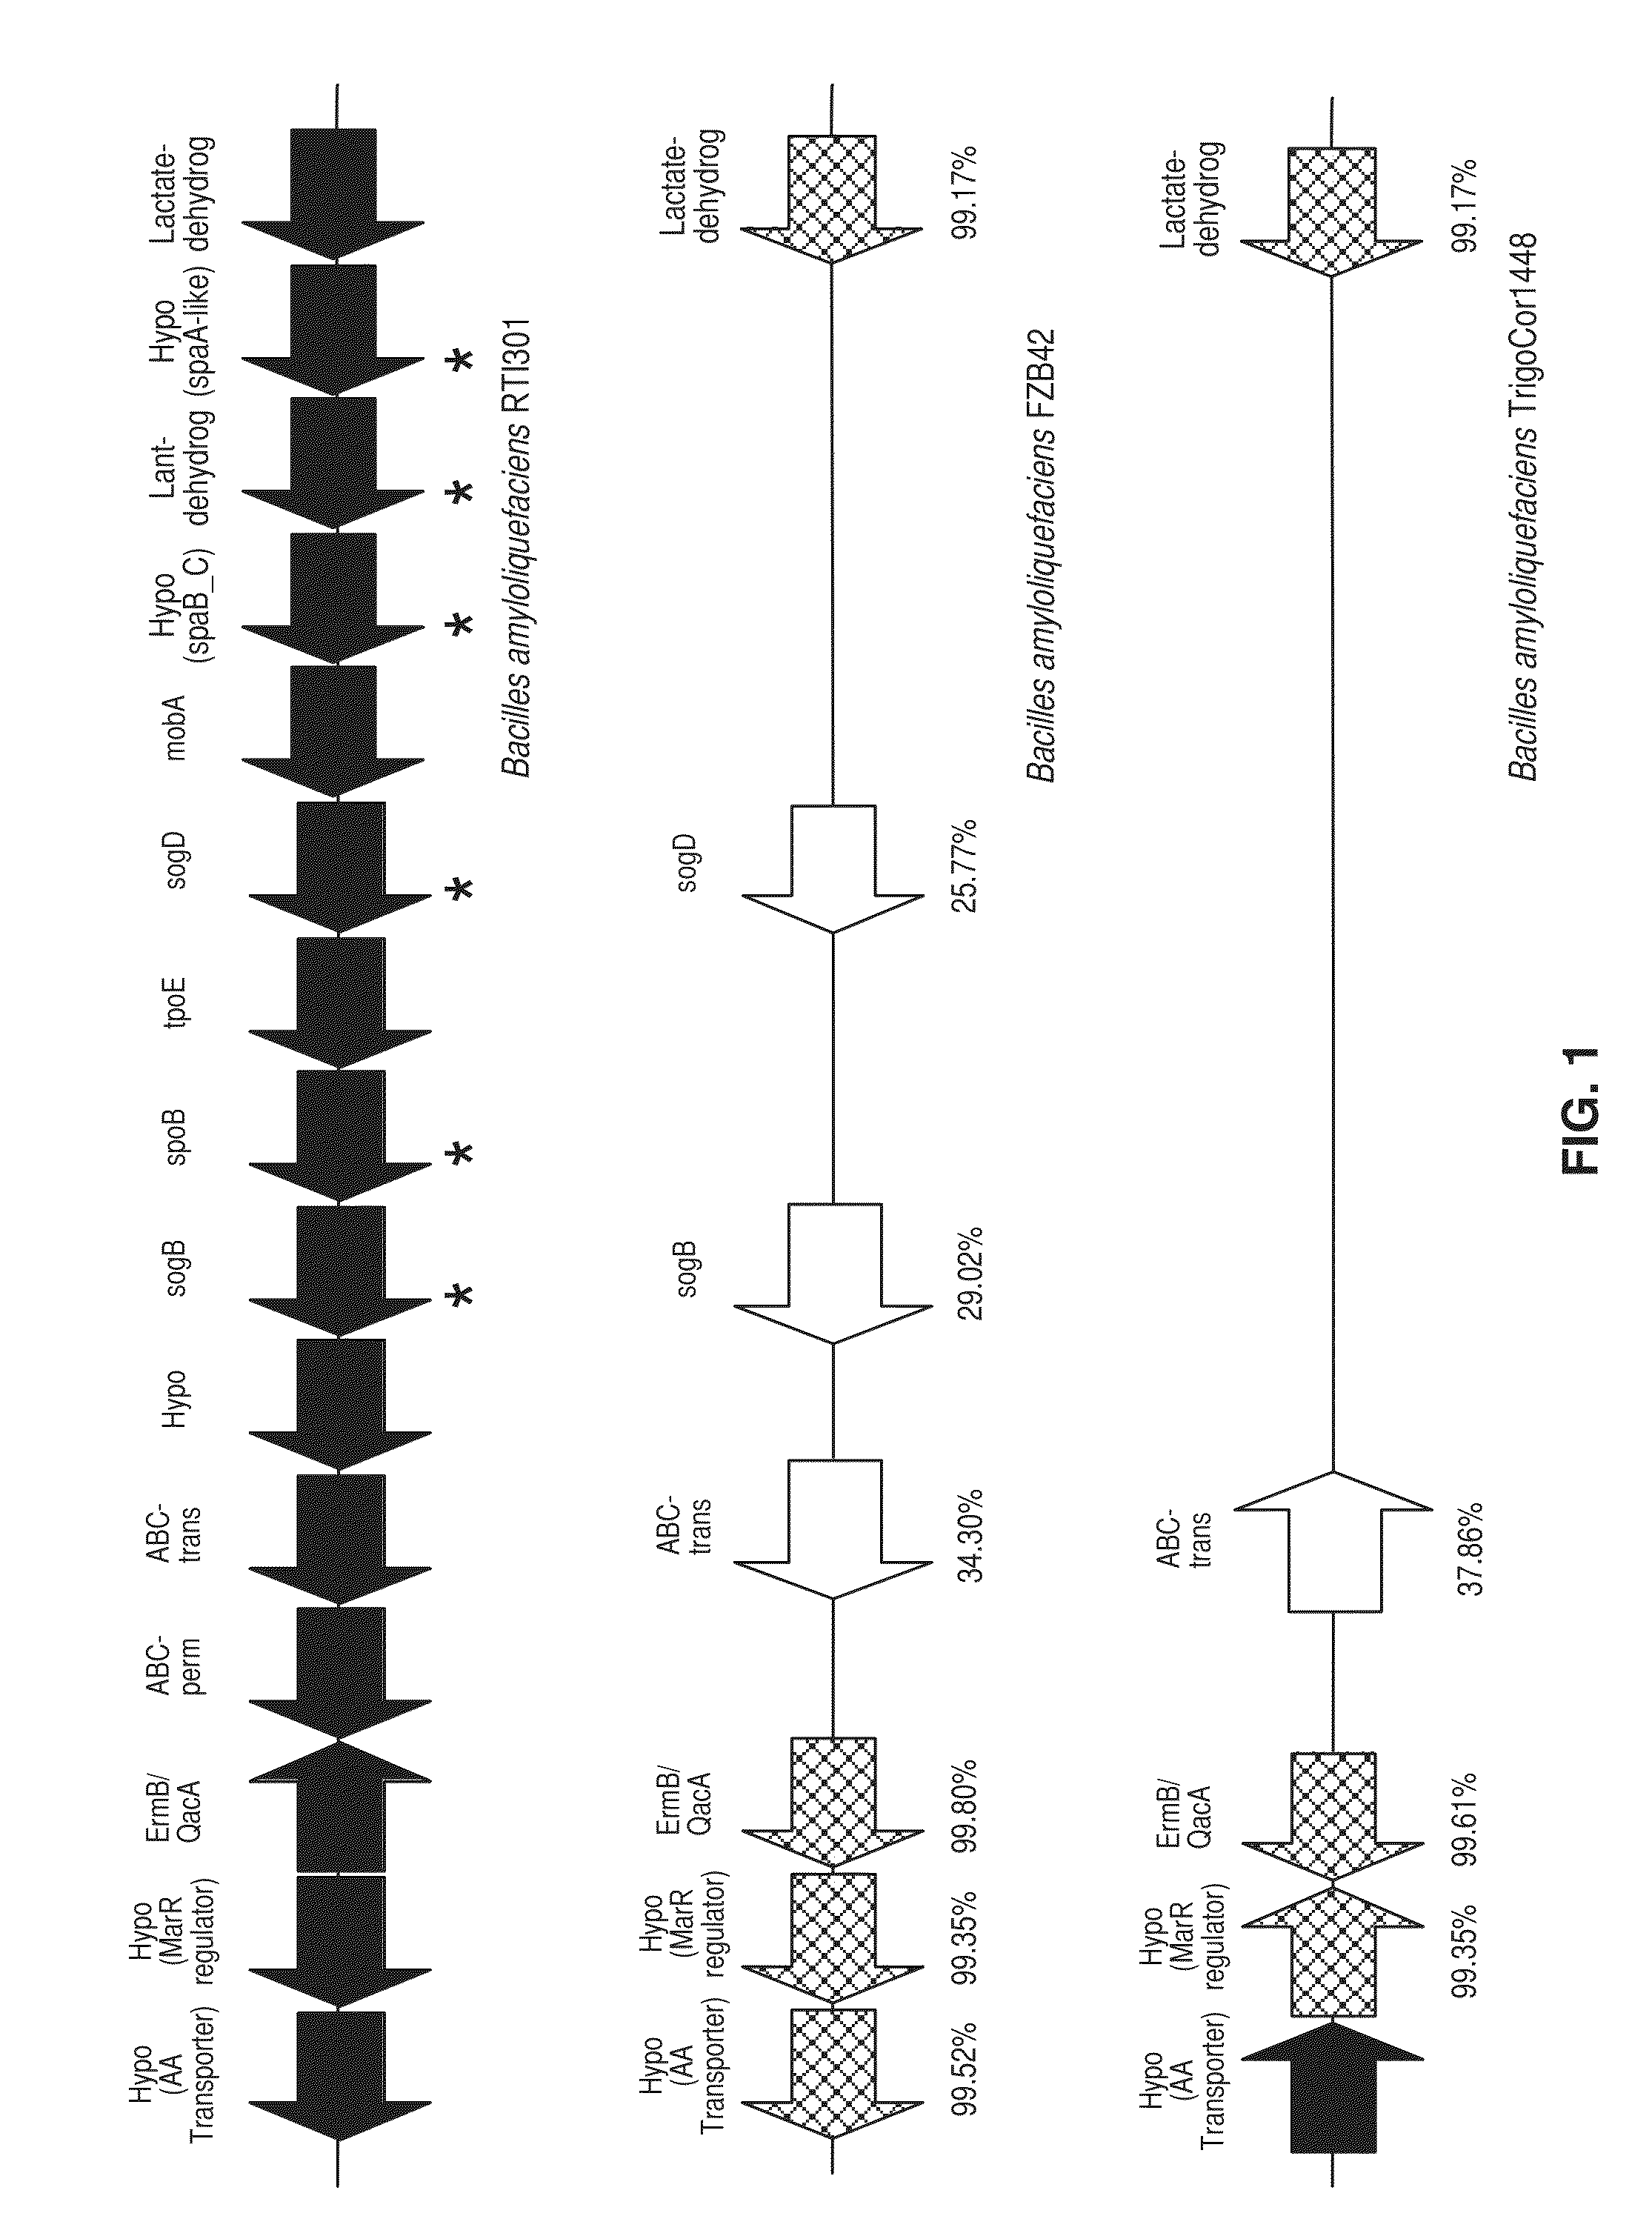 Bacillus amyloliquefaciens rti301 compositions and methods of use for benefiting plant growth and treating plant disease